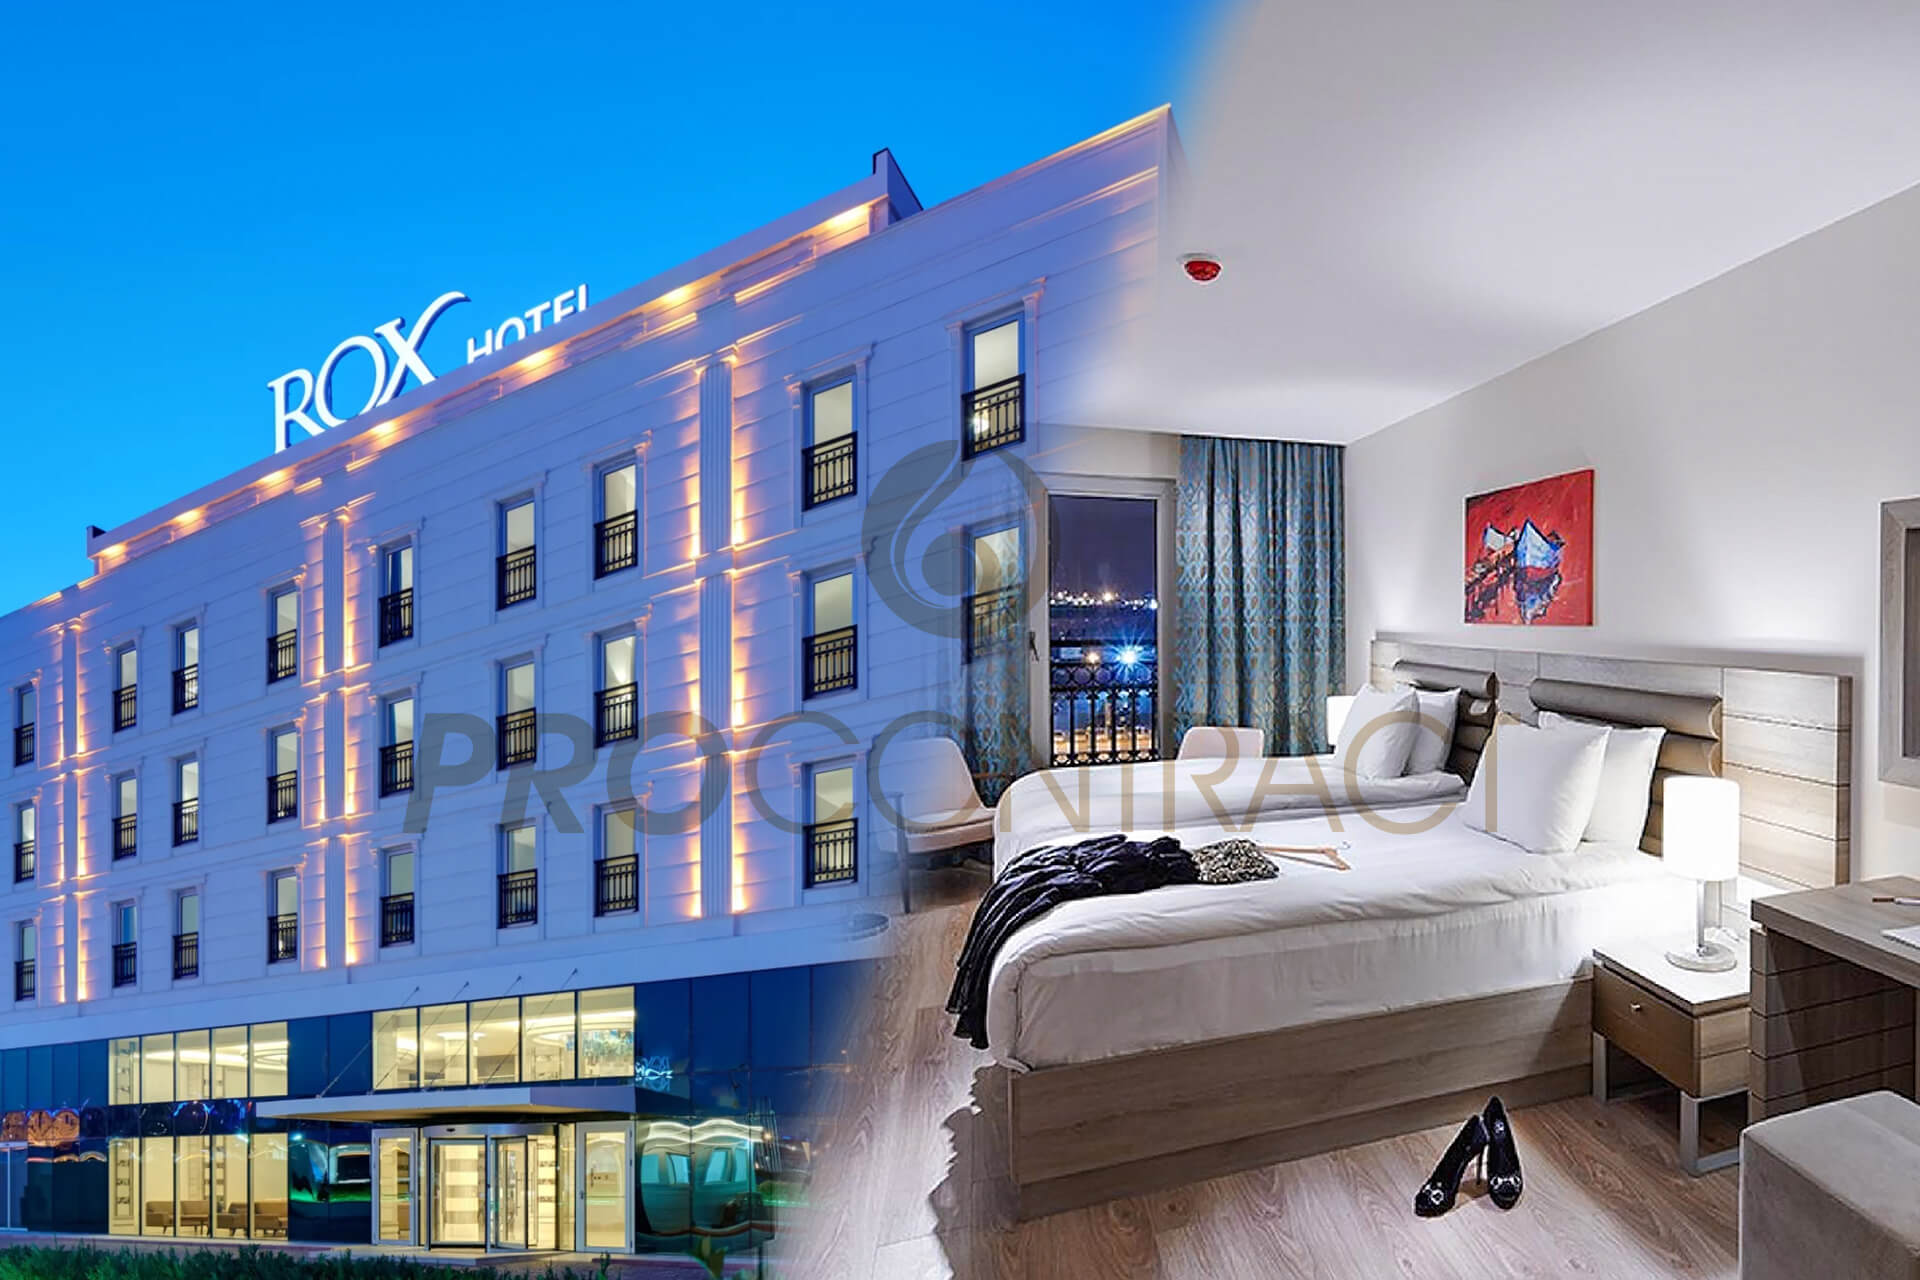 ROX HOTEL AIRPORT ISTANBUL